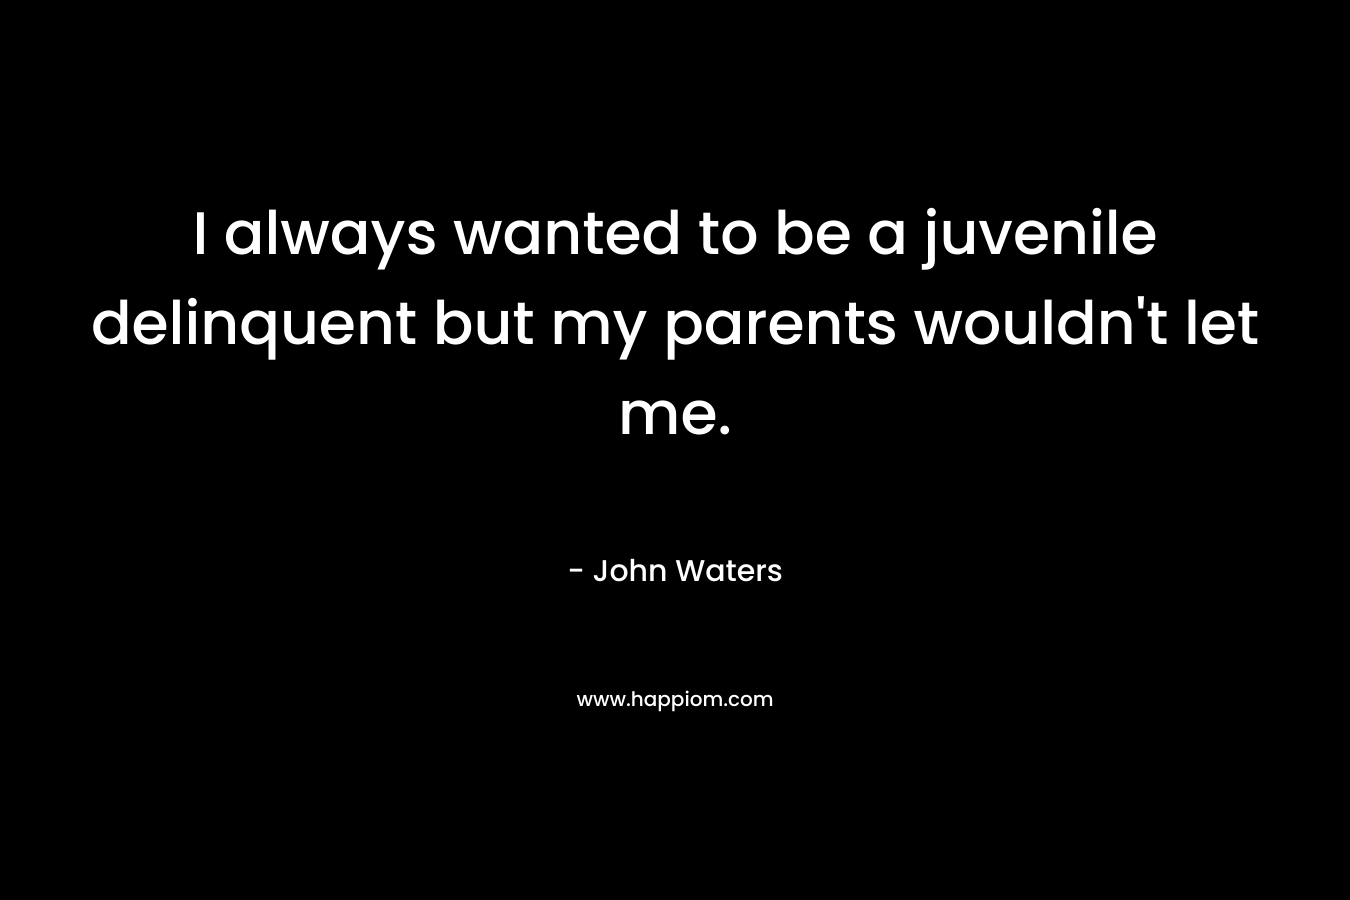 I always wanted to be a juvenile delinquent but my parents wouldn’t let me. – John Waters